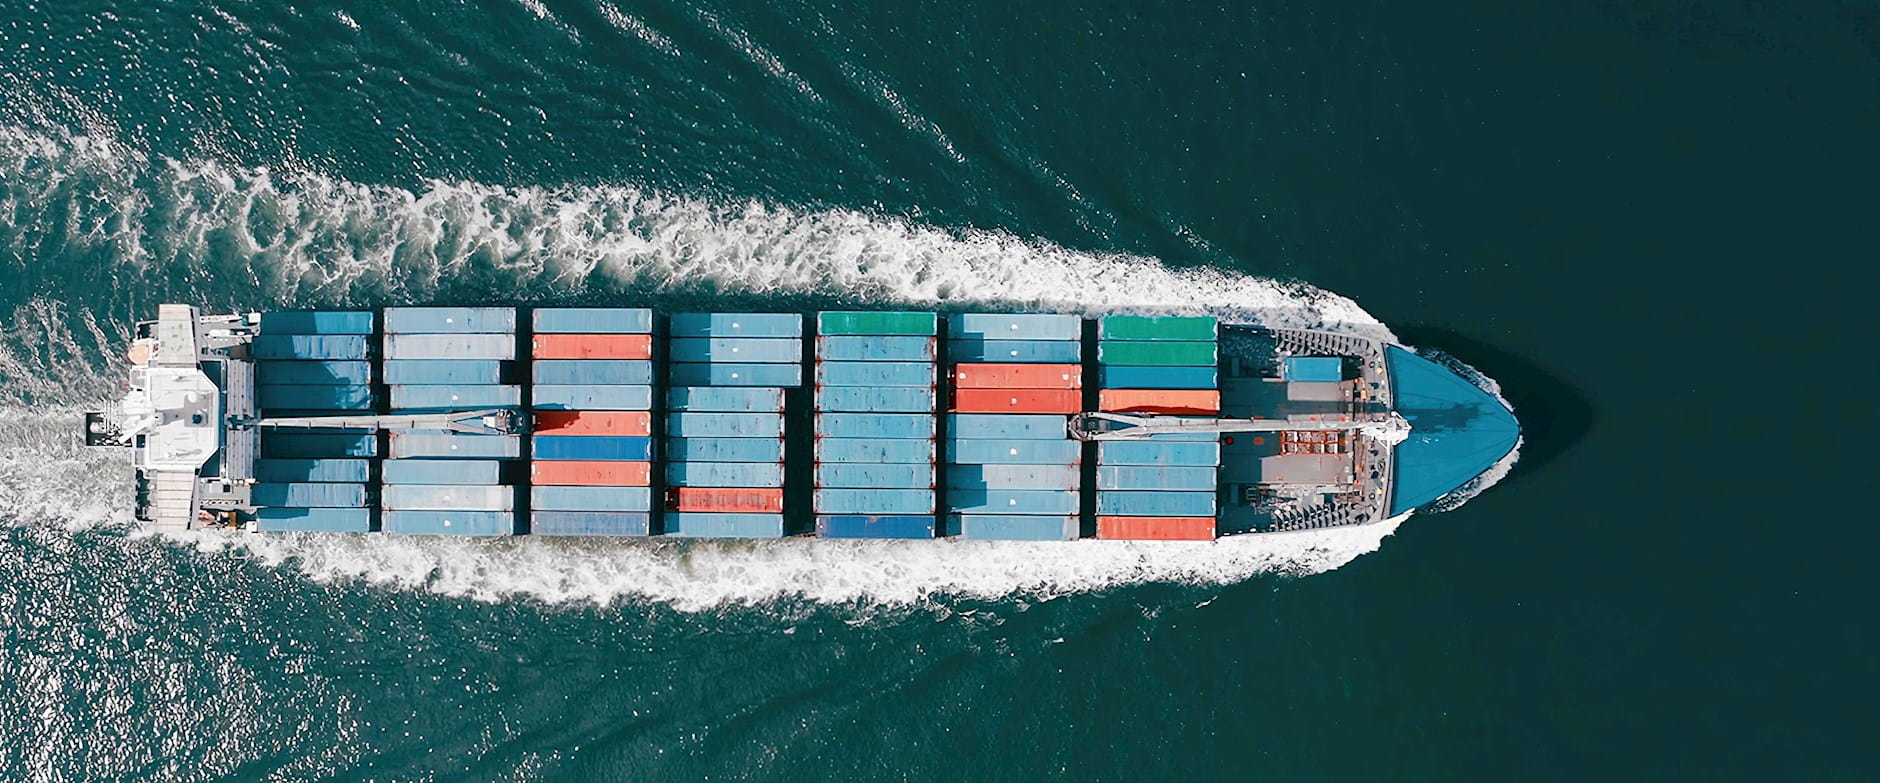 Container ship moving through the ocean as seen from above